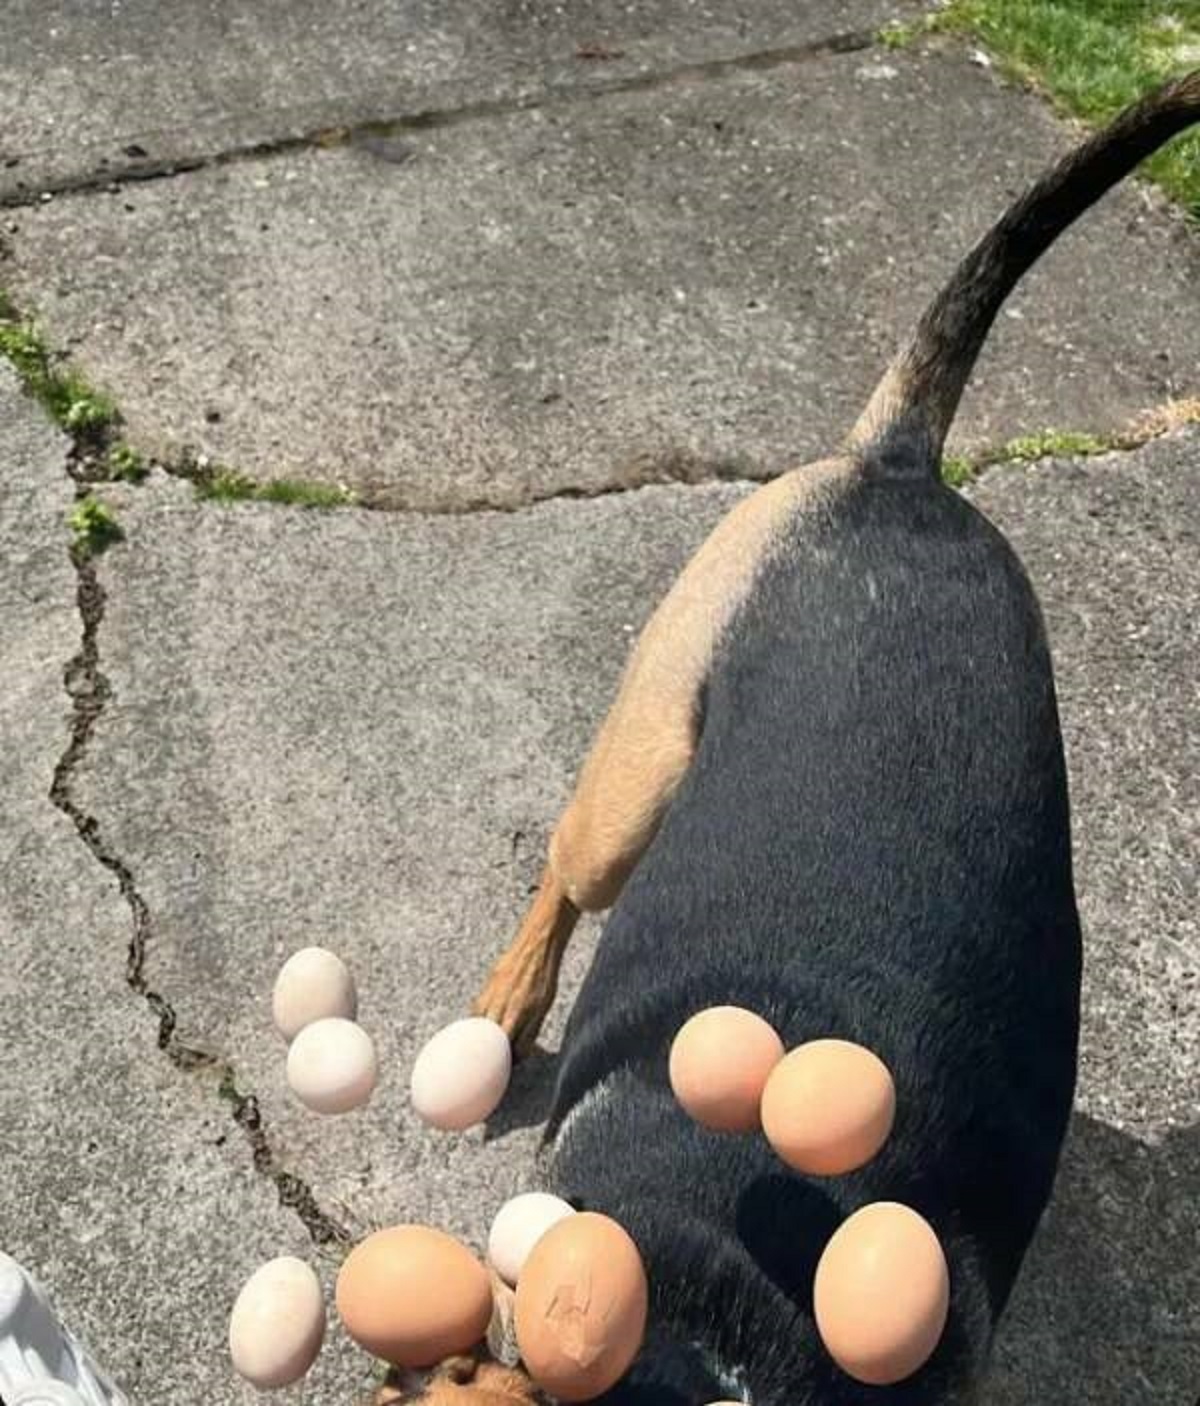 “I tried taking a picture of my friend’s dog but he ended up attacking the carton of eggs I was holding.”